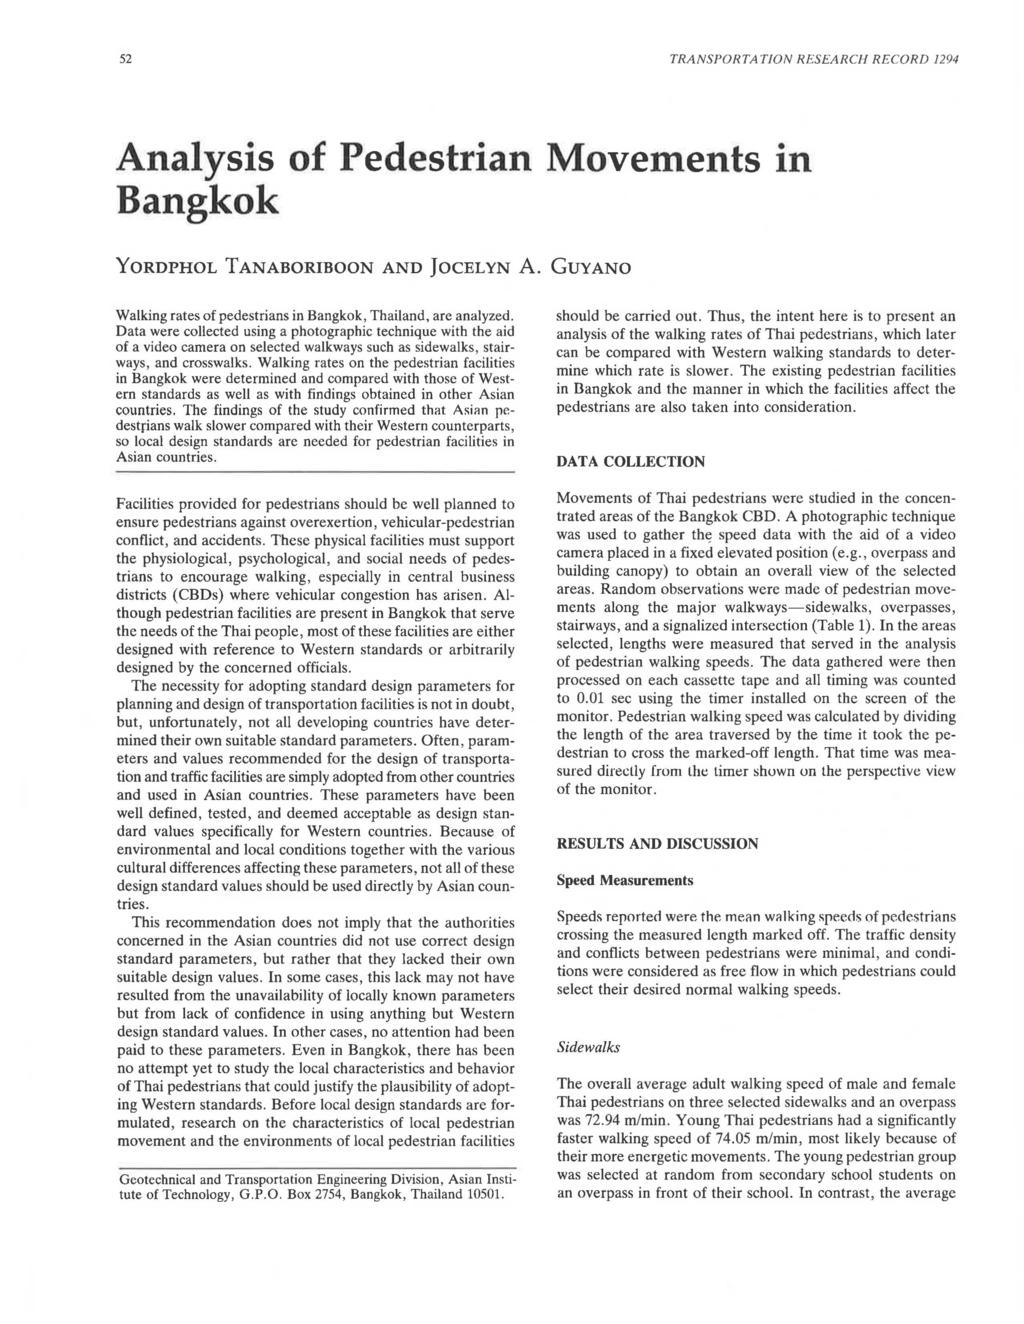 52 TRANSPORTATION RESEARCH RECORD 1294 Analysis of Pedestrian Movements in Bangkok YORDPHOL TANABORIBOON AND JOCELYN A. GUYANO Walking rates of pedestrians in Bangkok, Thailand, are analyzed.